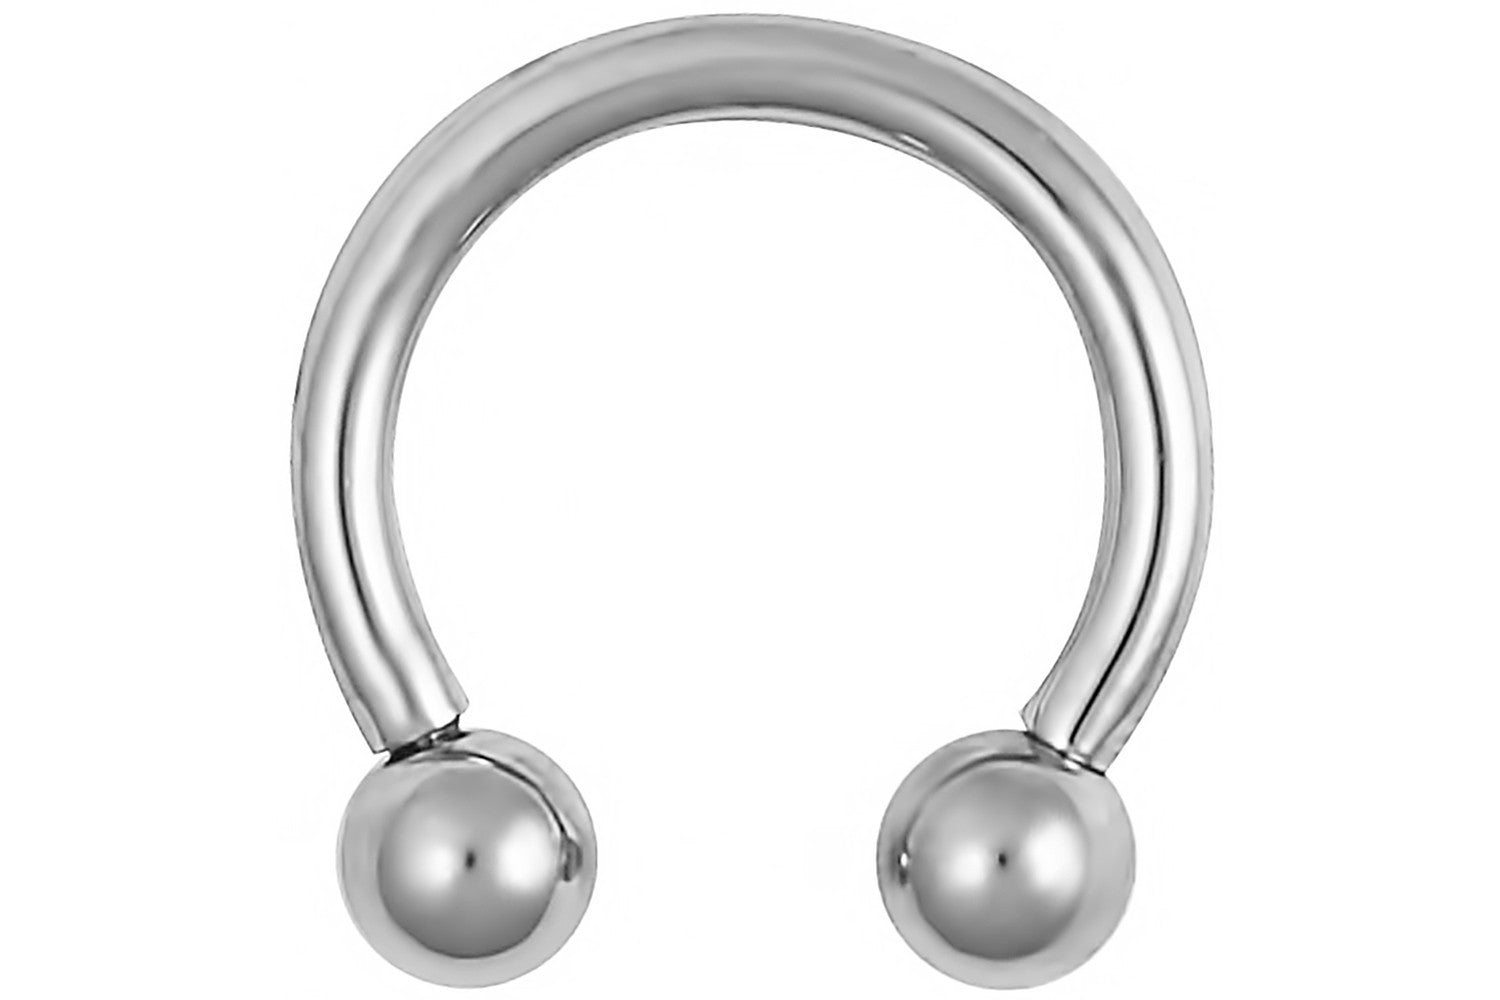 This 16 gauge 8 mm horseshoe ring is internally threaded for maximum comfort and ease of use. It is made with surgical grade 316L Stainless Steel.